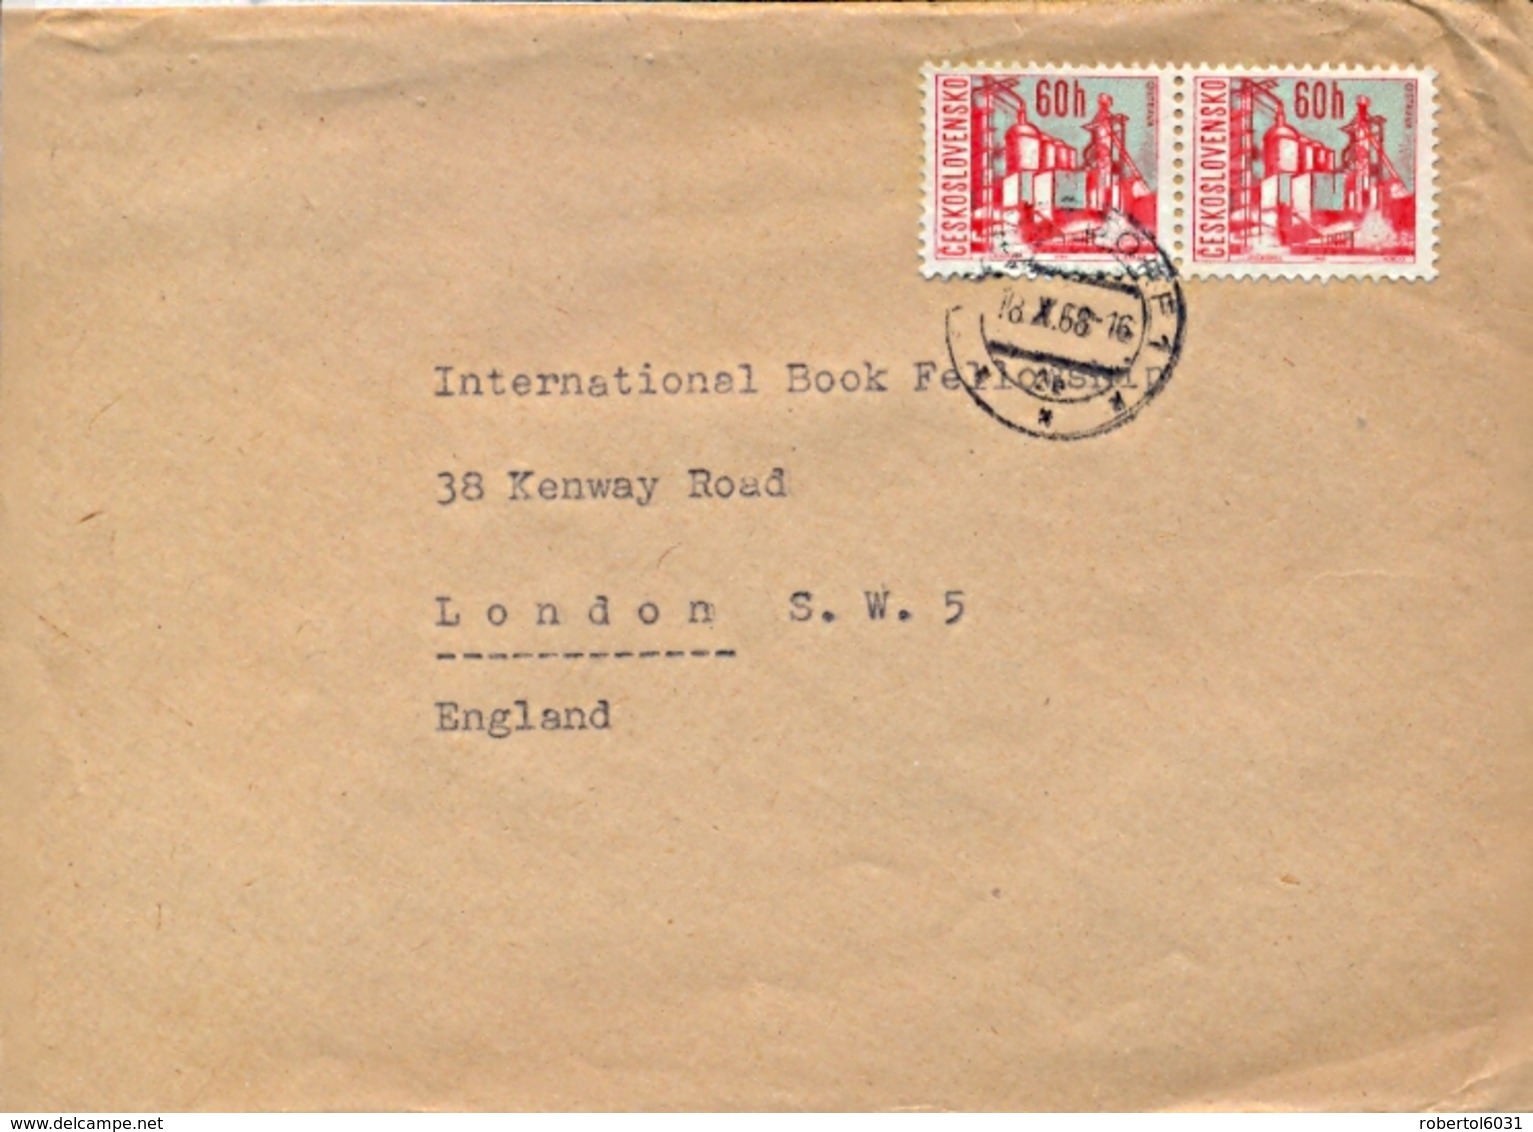 Czechoslovakia 1968 Cover To Great Britain With 2 X 60 H. Ostrava Metallurgical Plant - Fabbriche E Imprese